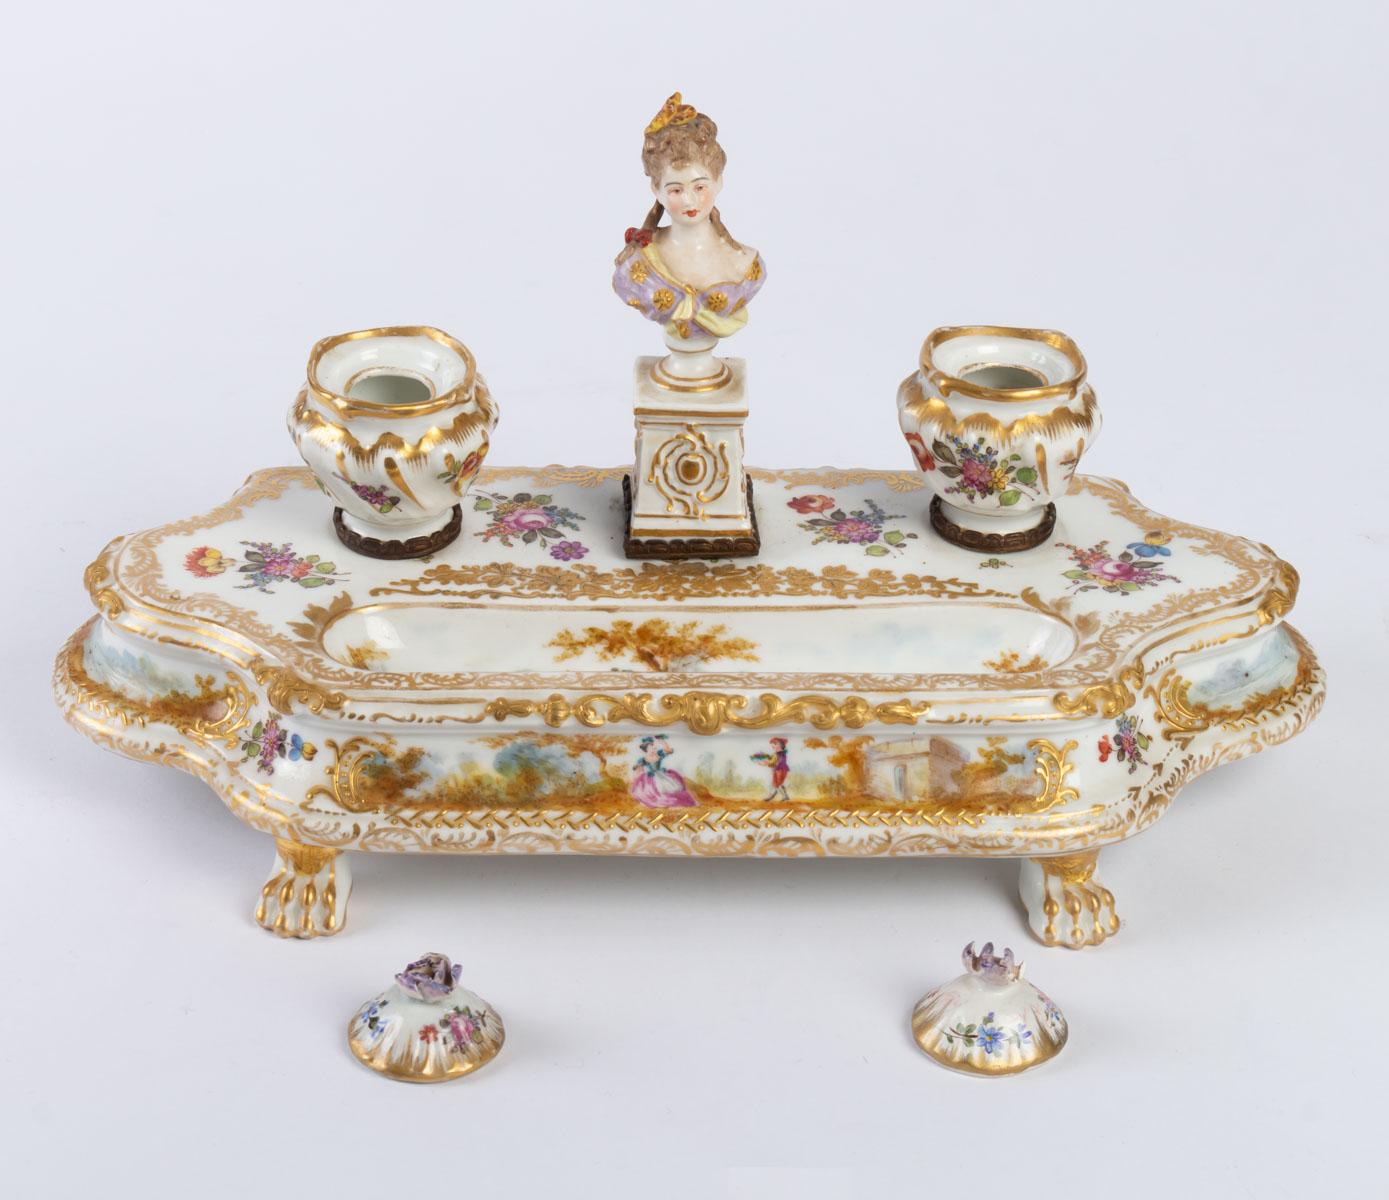 Painted Inkwell in Meissen Porcelain, 19th Century